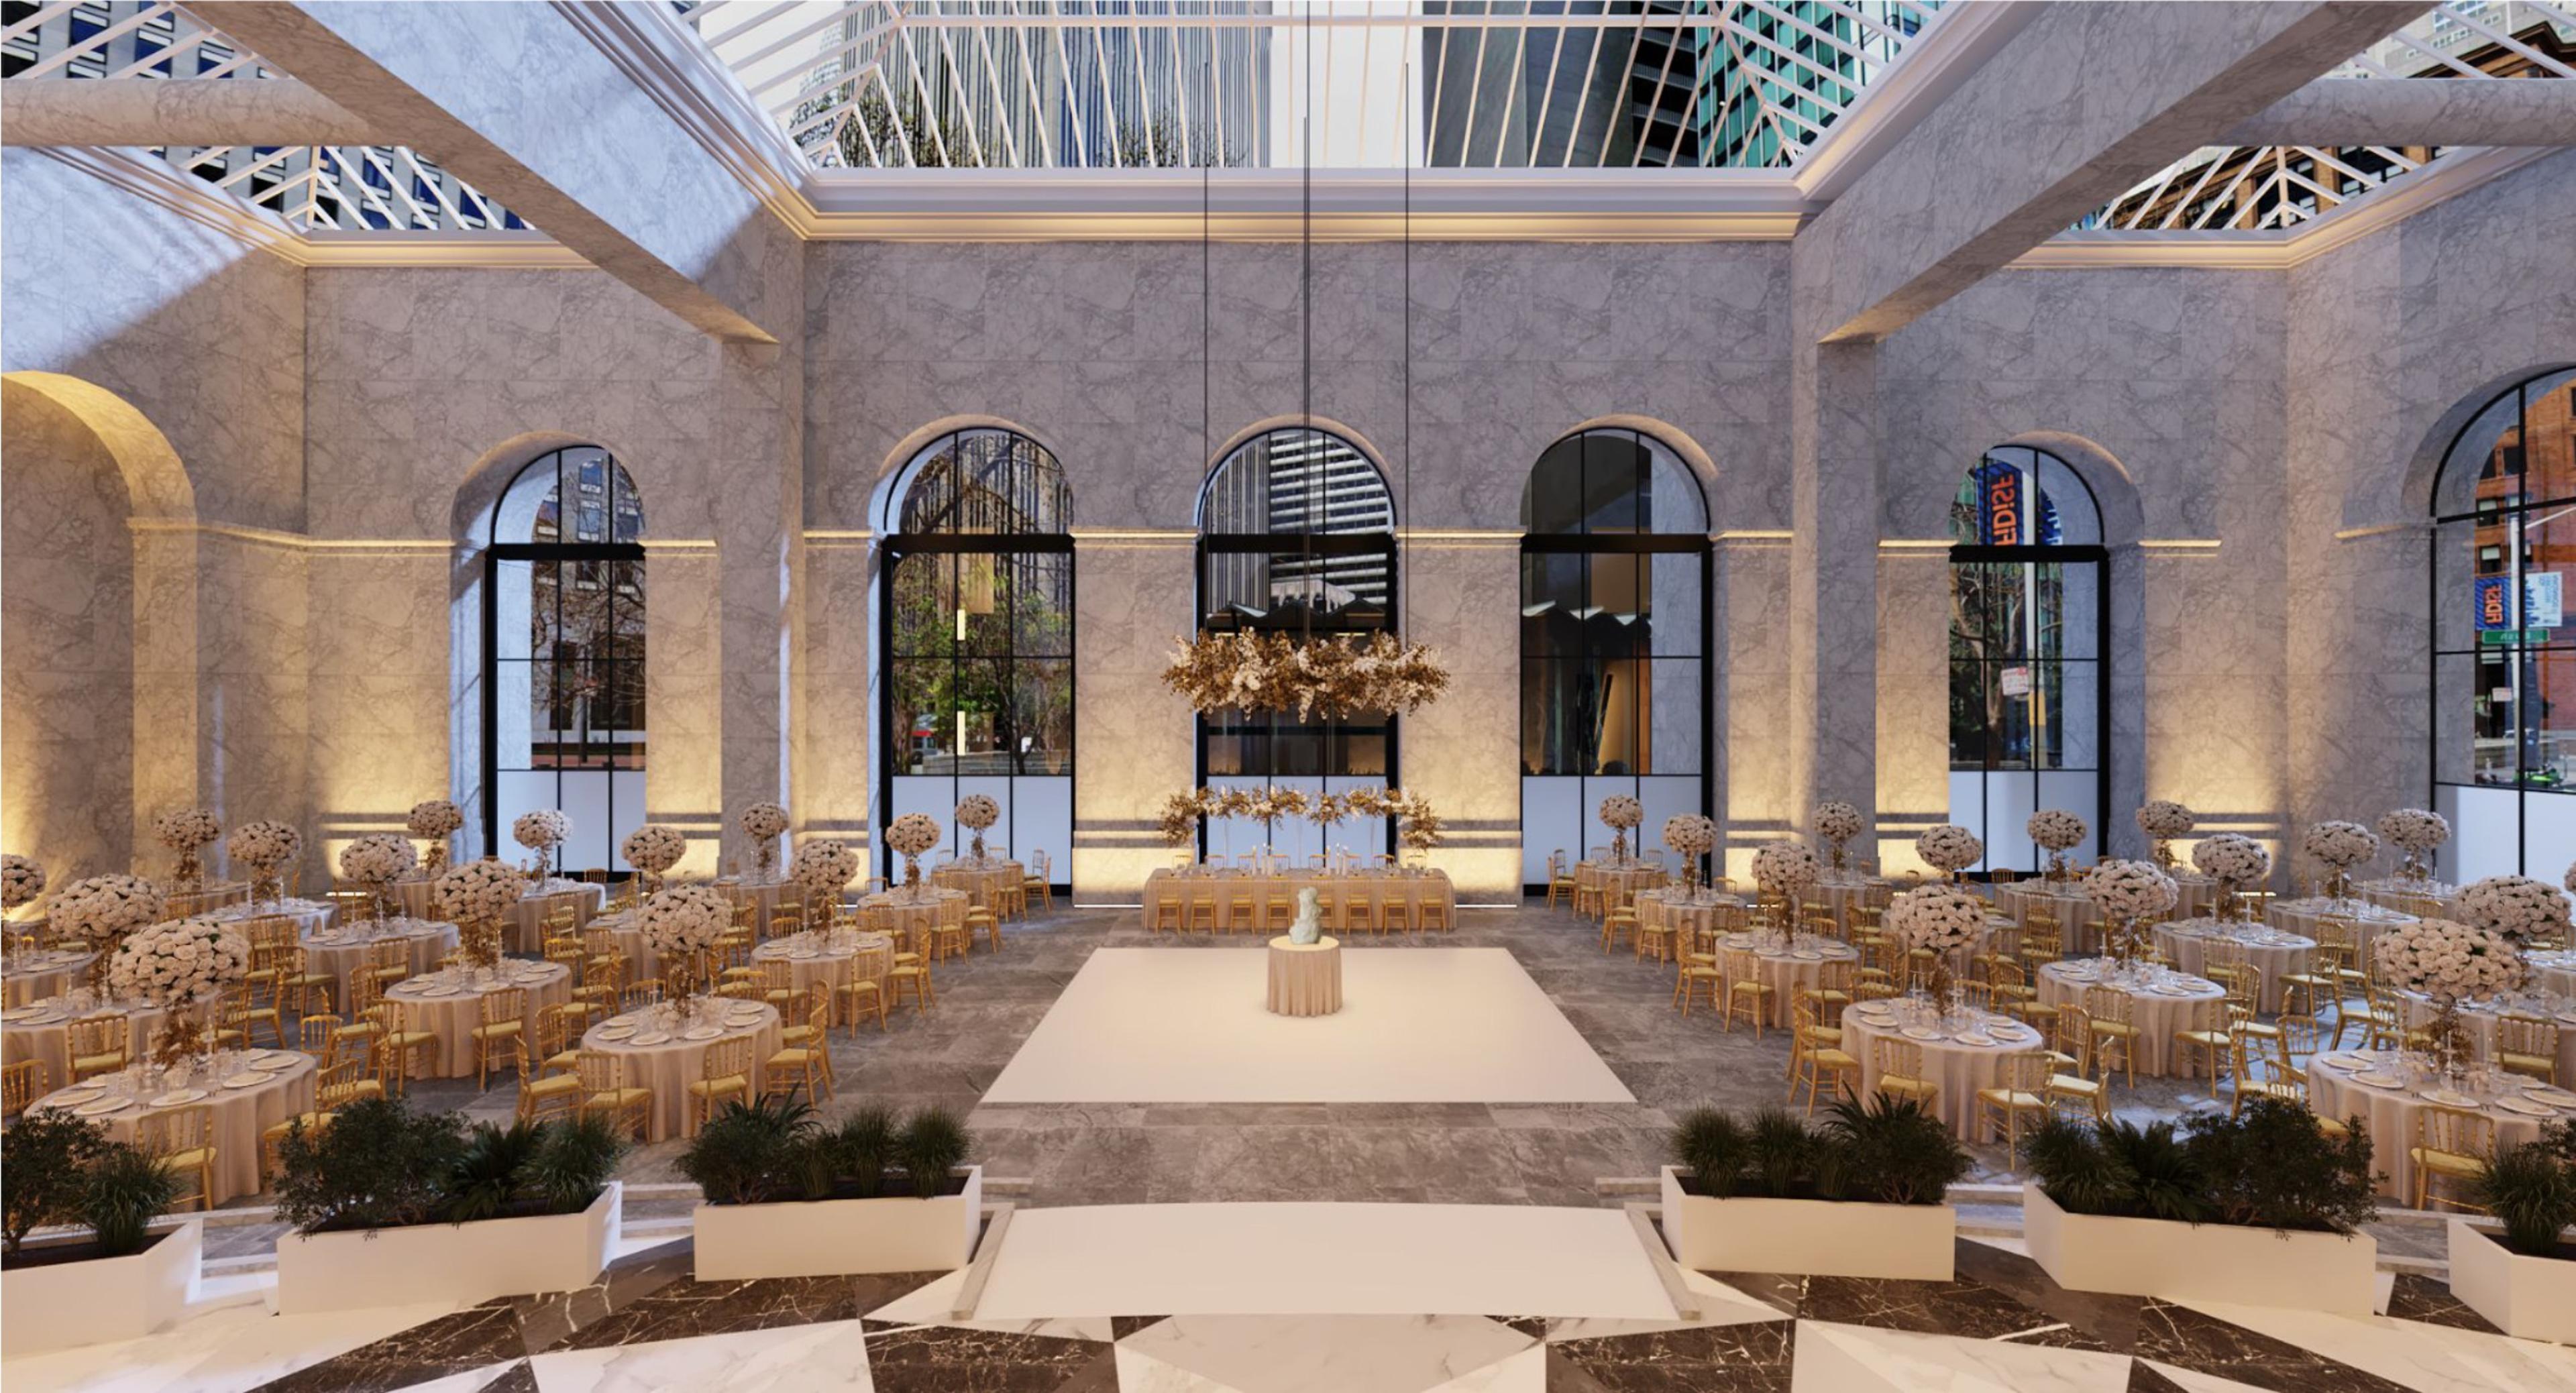 The Conservatory at One Sansome